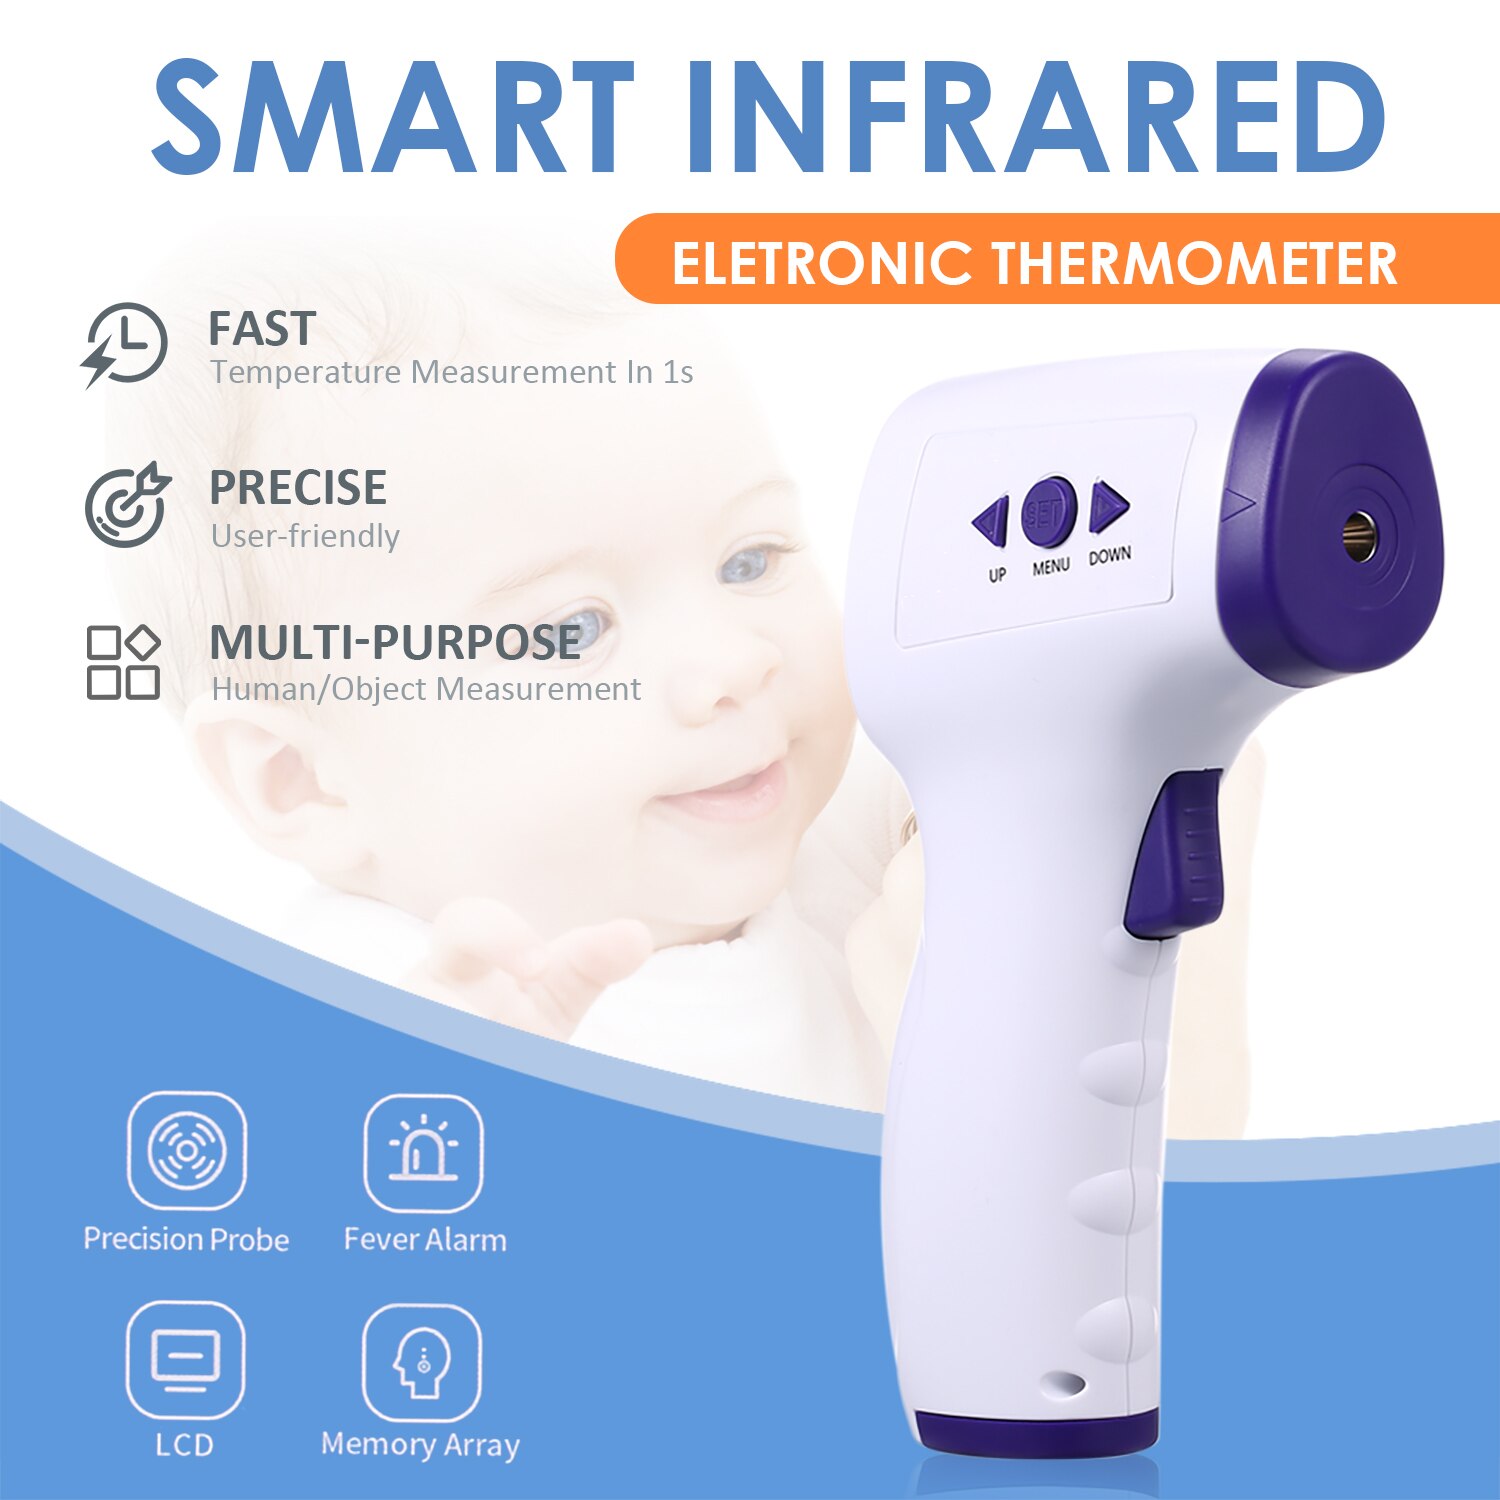 Digitale Thermometer Non-contact Ir Infrarood Sensor Voorhoofd Body/ Object Thermometer Temperatuurmeting Lcd Digitale Display